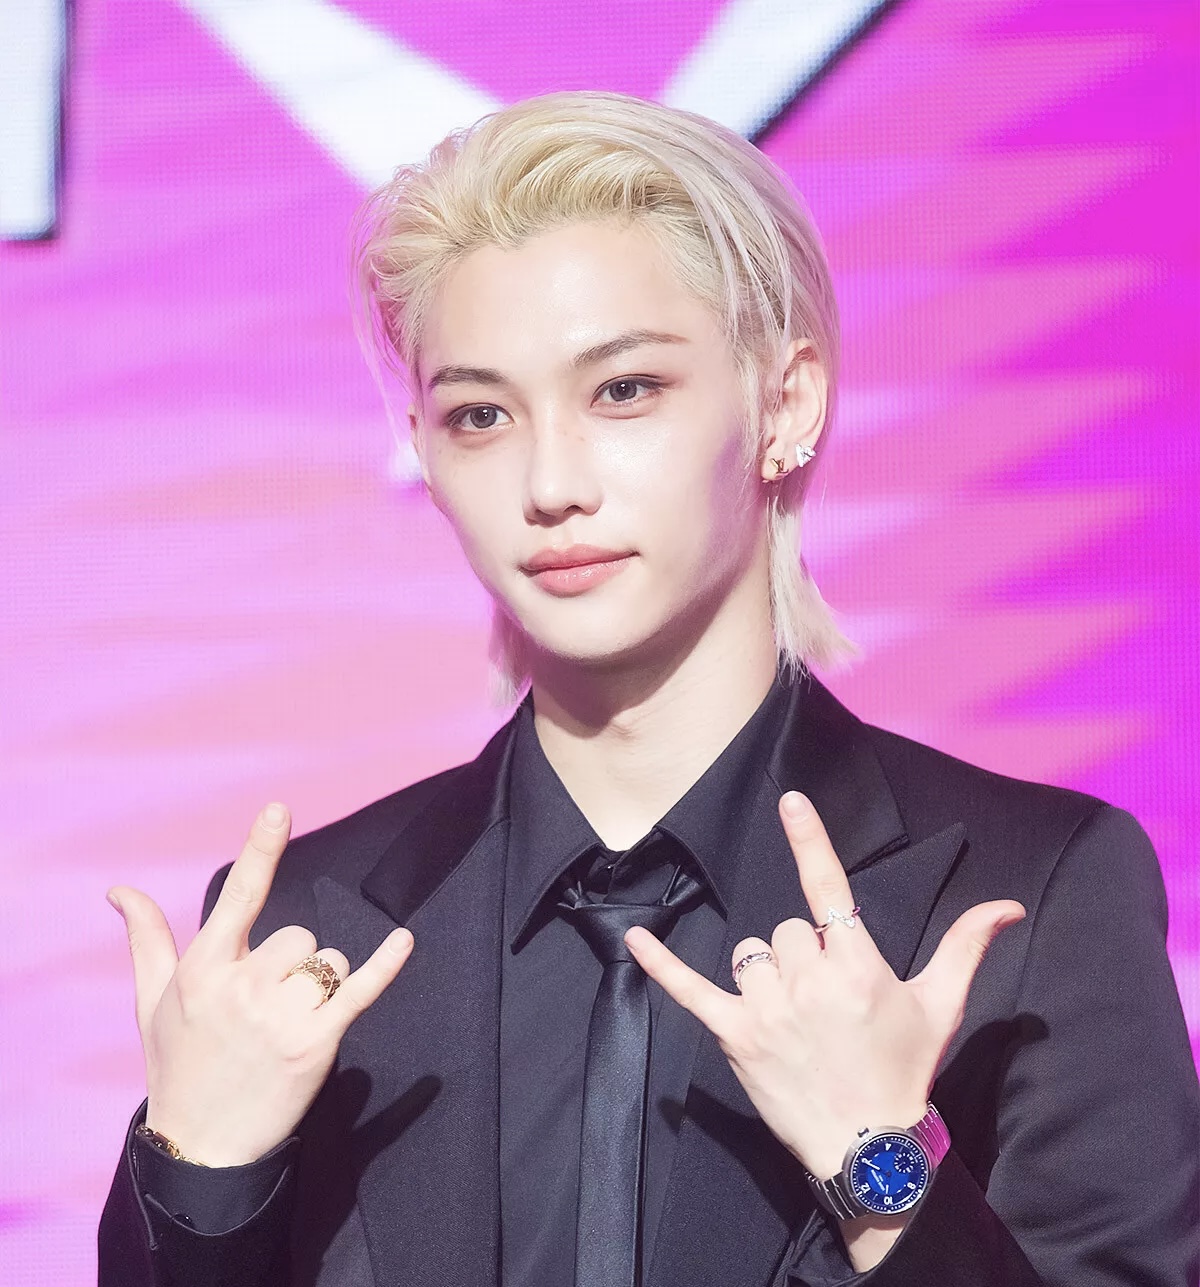 Felix of Stray Kids at a press conference, dressed in a Louis Vuitton black tuxedo and accessorized with fine jewelry, against a pink backdrop.